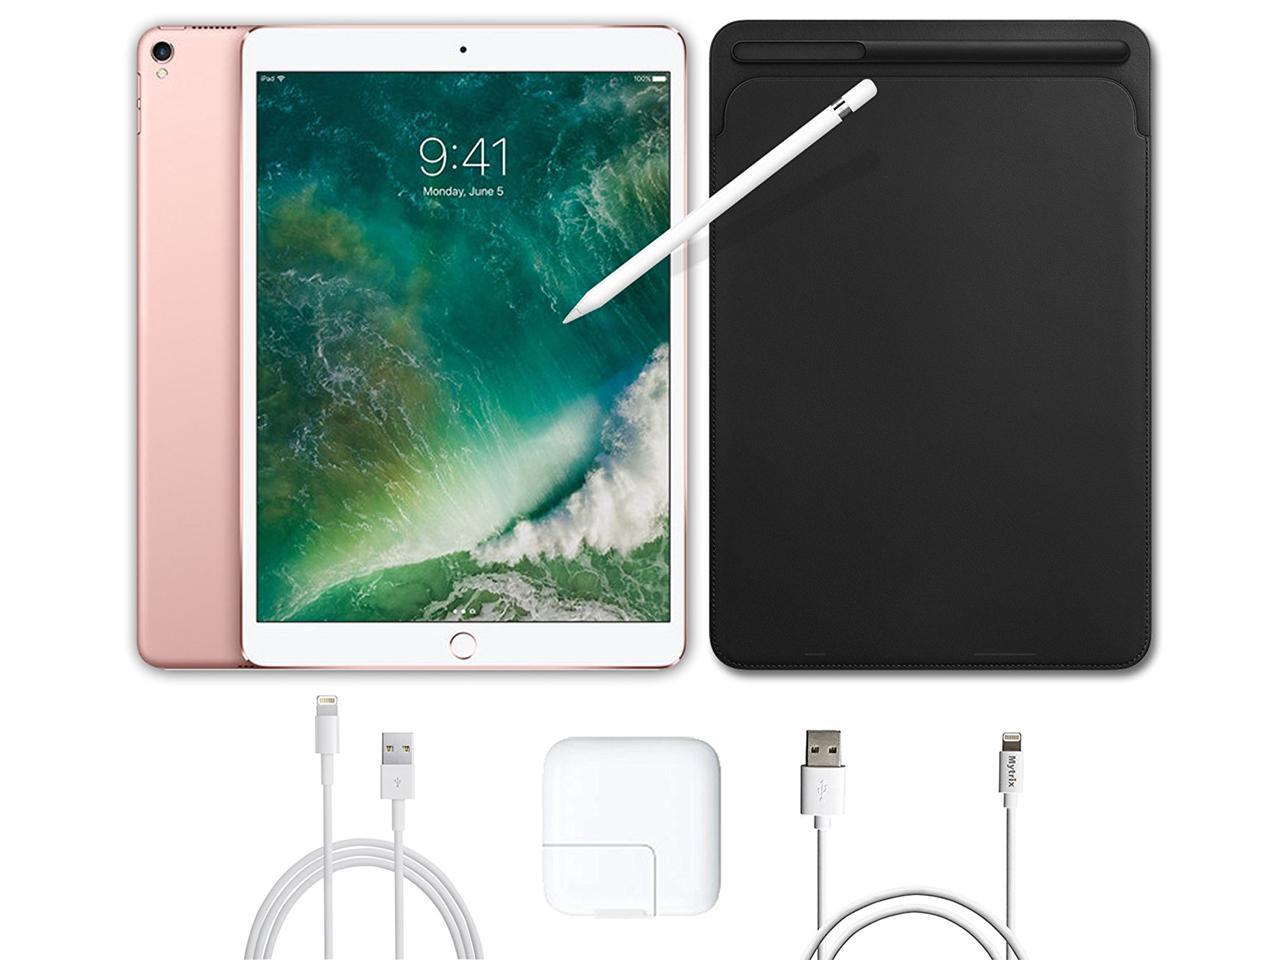 2017 New iPad Pro Bundle (4 Items): Apple 10.5 inch iPad Pro with Wi-Fi 256 GB Rose Gold, Black Leather Sleeve, Apple Pencil and Mytrix USB Apple Lightning Cable